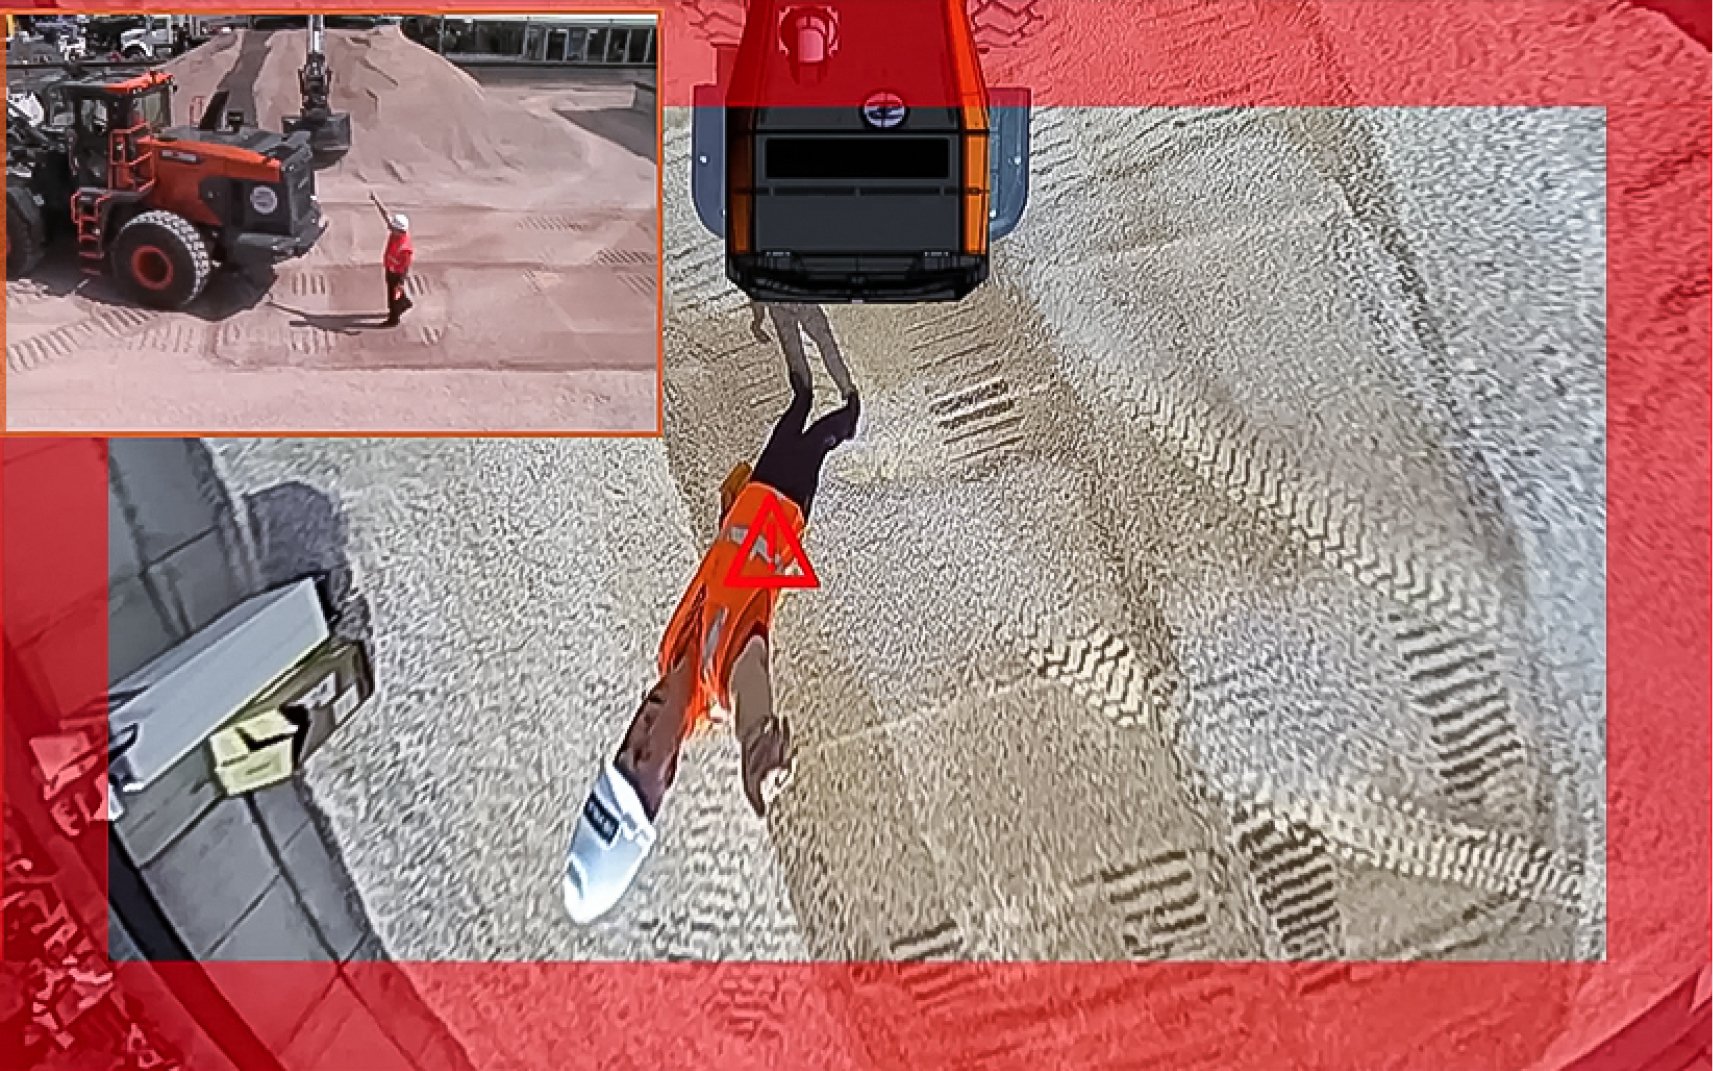 A red rectangle flashes around a possible hazard as seen on a monitor as part of the DEVELON object detection safety feature